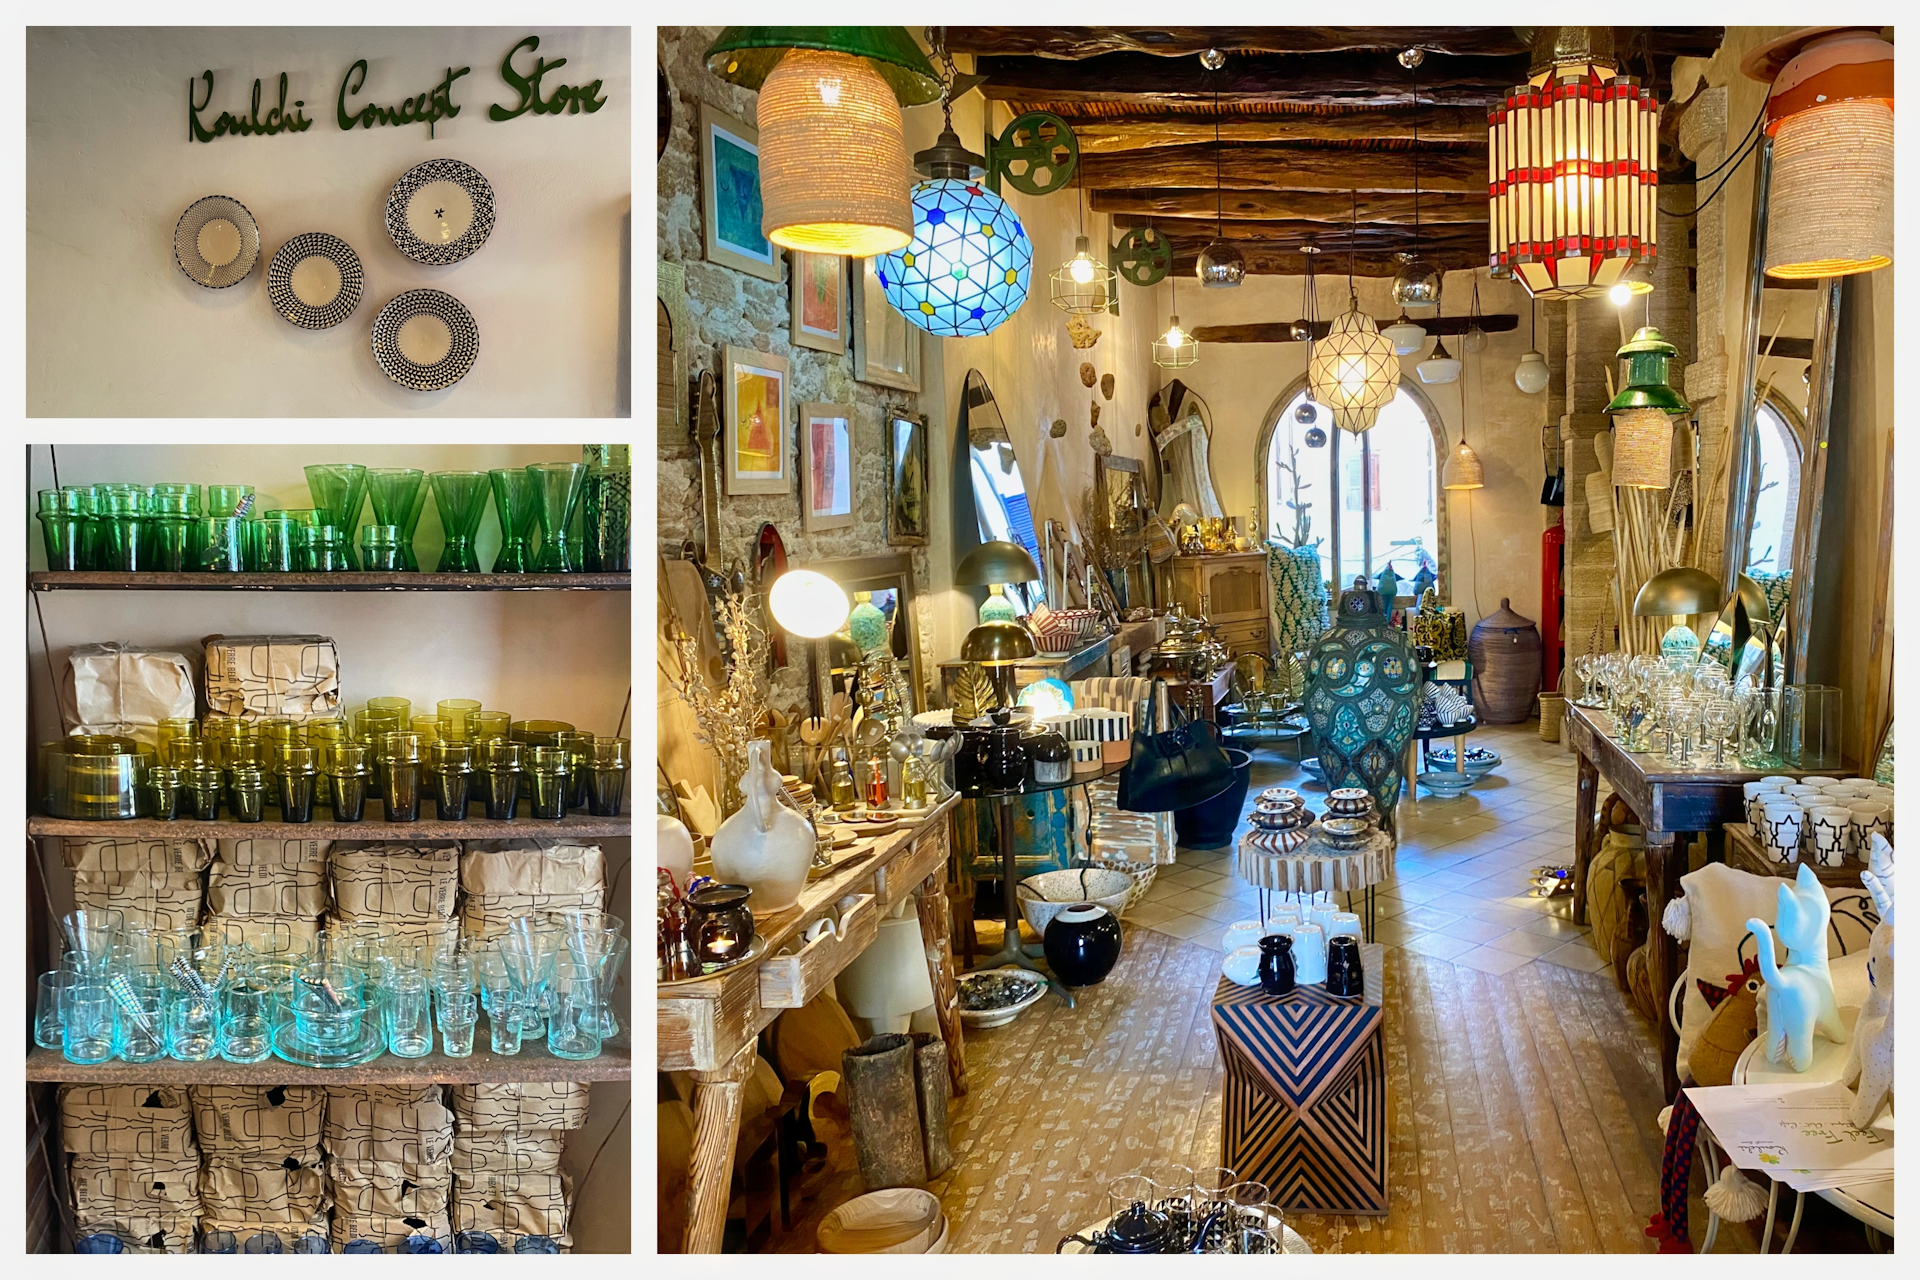 The interior of a concept store in Essaouira selling glassware and trinkets